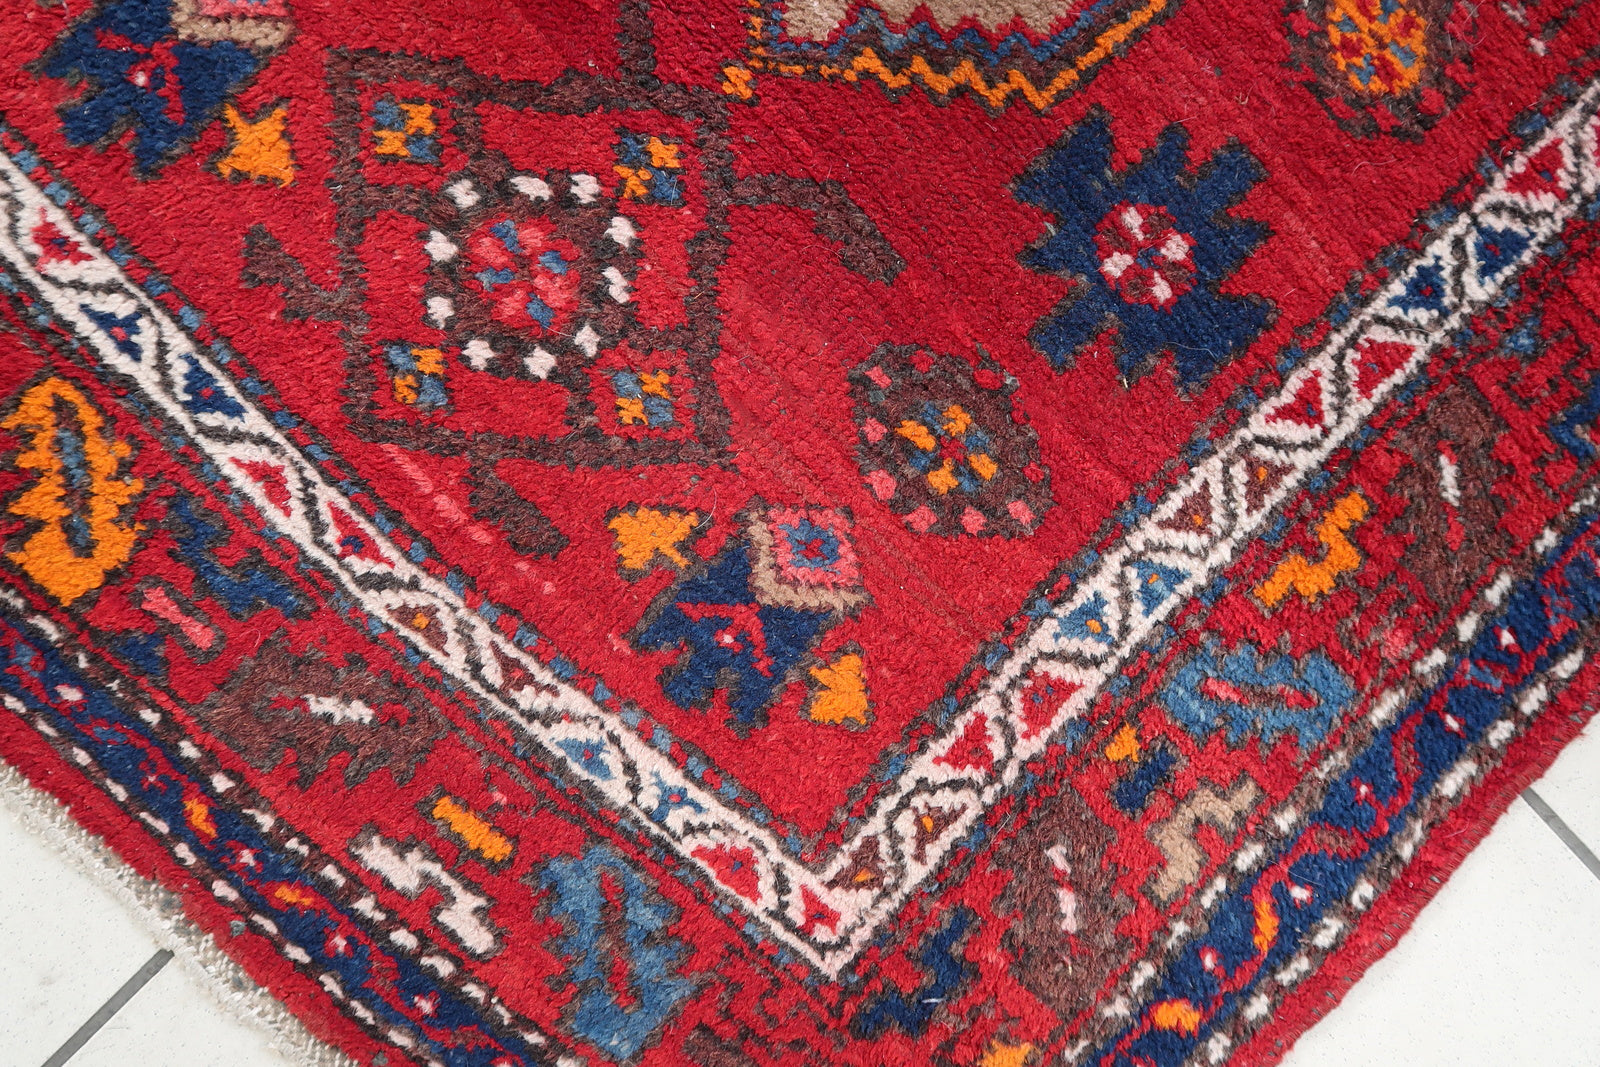 Handmade vintage Persian Hamadan rug in bright red color with large medallion. The rug is from the end of 20th century in original condition, it has some low pile.